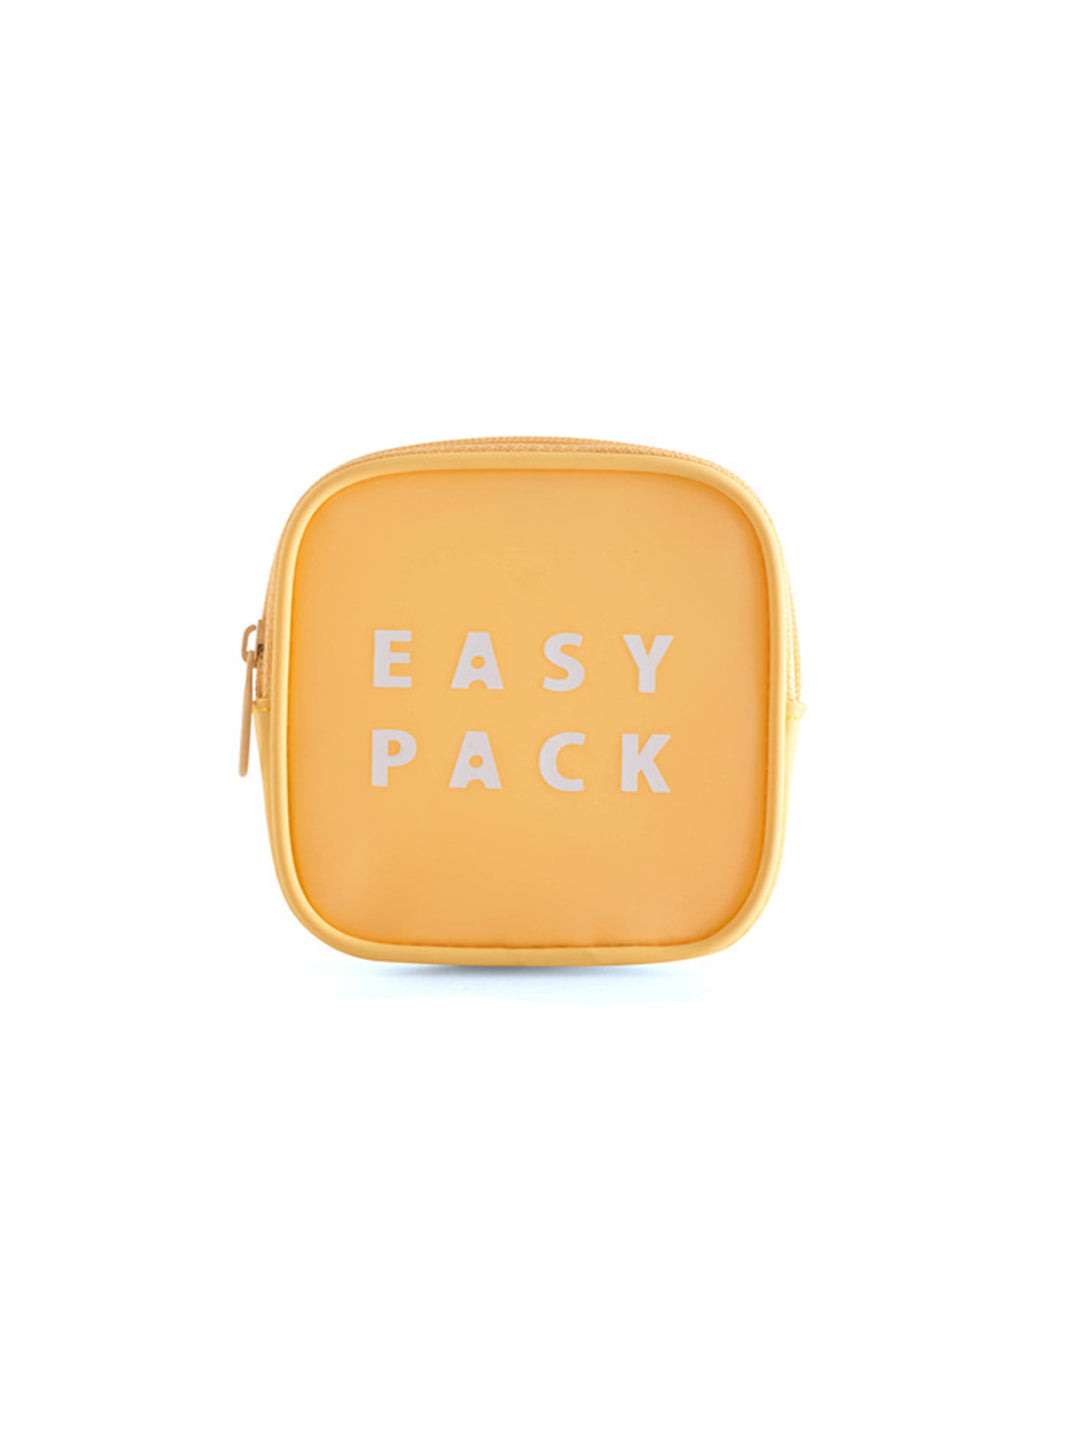 VON CASA Square Plastic Travel Pouch - Easy Pack - Yellow